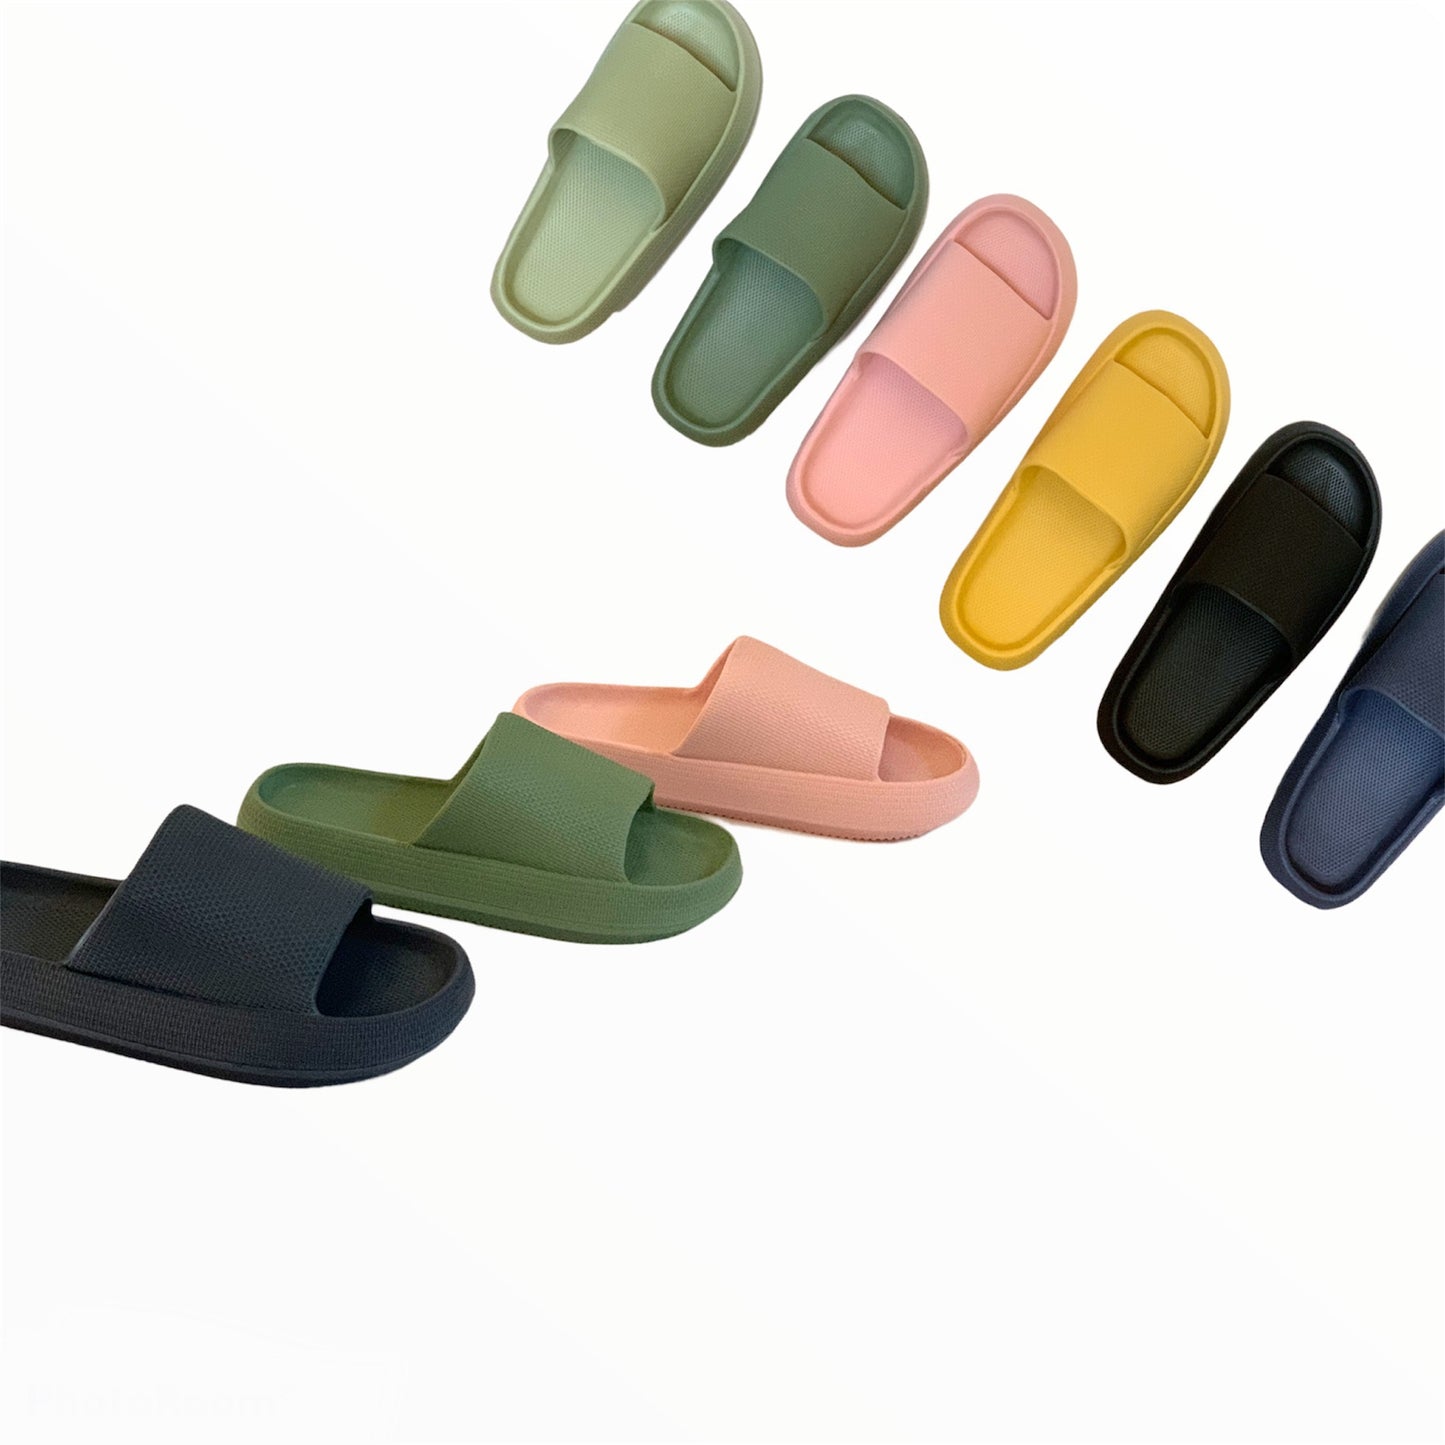 Anti-slip slippers, arch support sandals, washable and waterproof slippers, thick sole slippers, fashion trend 2021, best selling shoes.